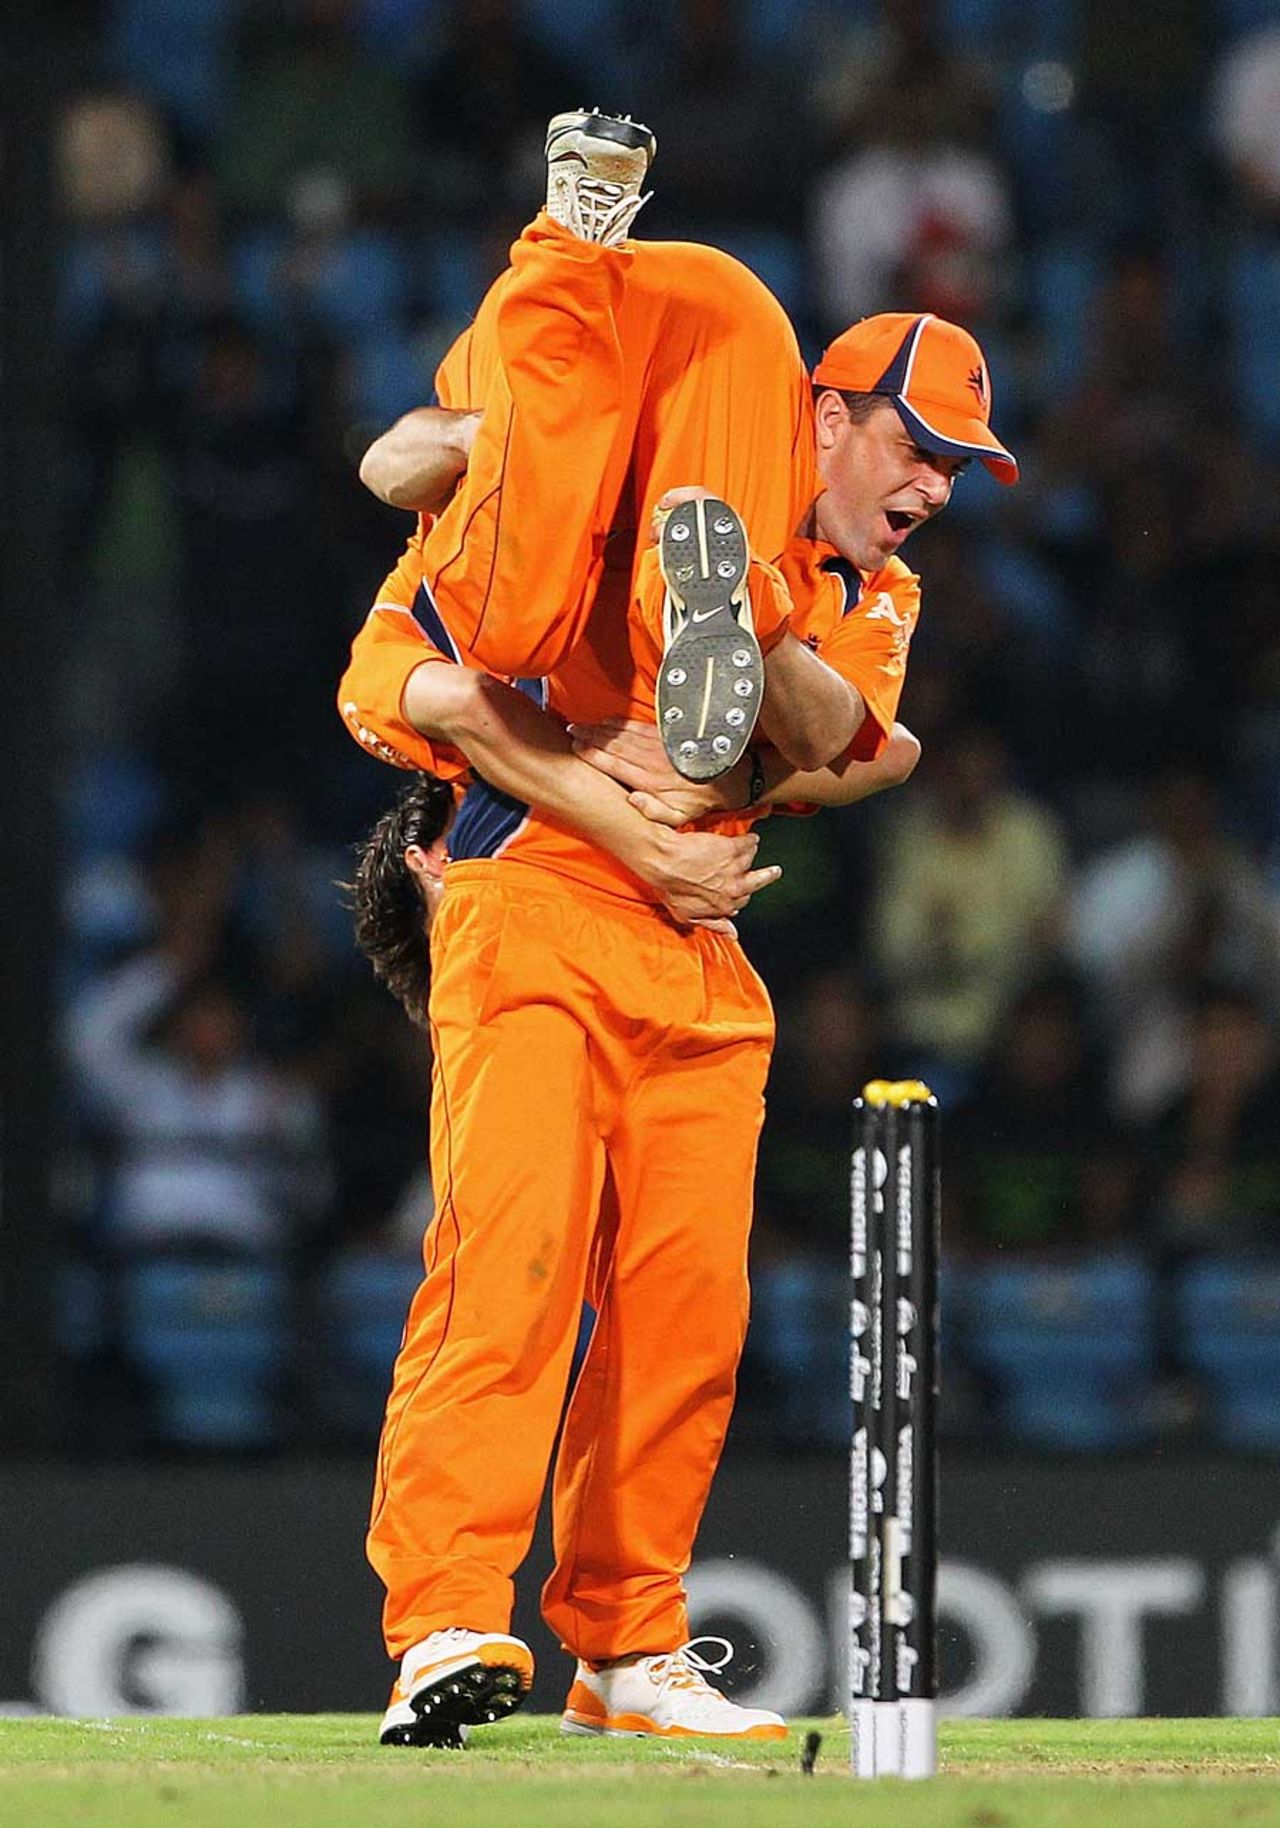 Peter Borren celebrates with Pieter Seelaar after Kevin Pietersen's wicket, England v Netherlands, Group B, World Cup, Nagpur, February 22, 2011